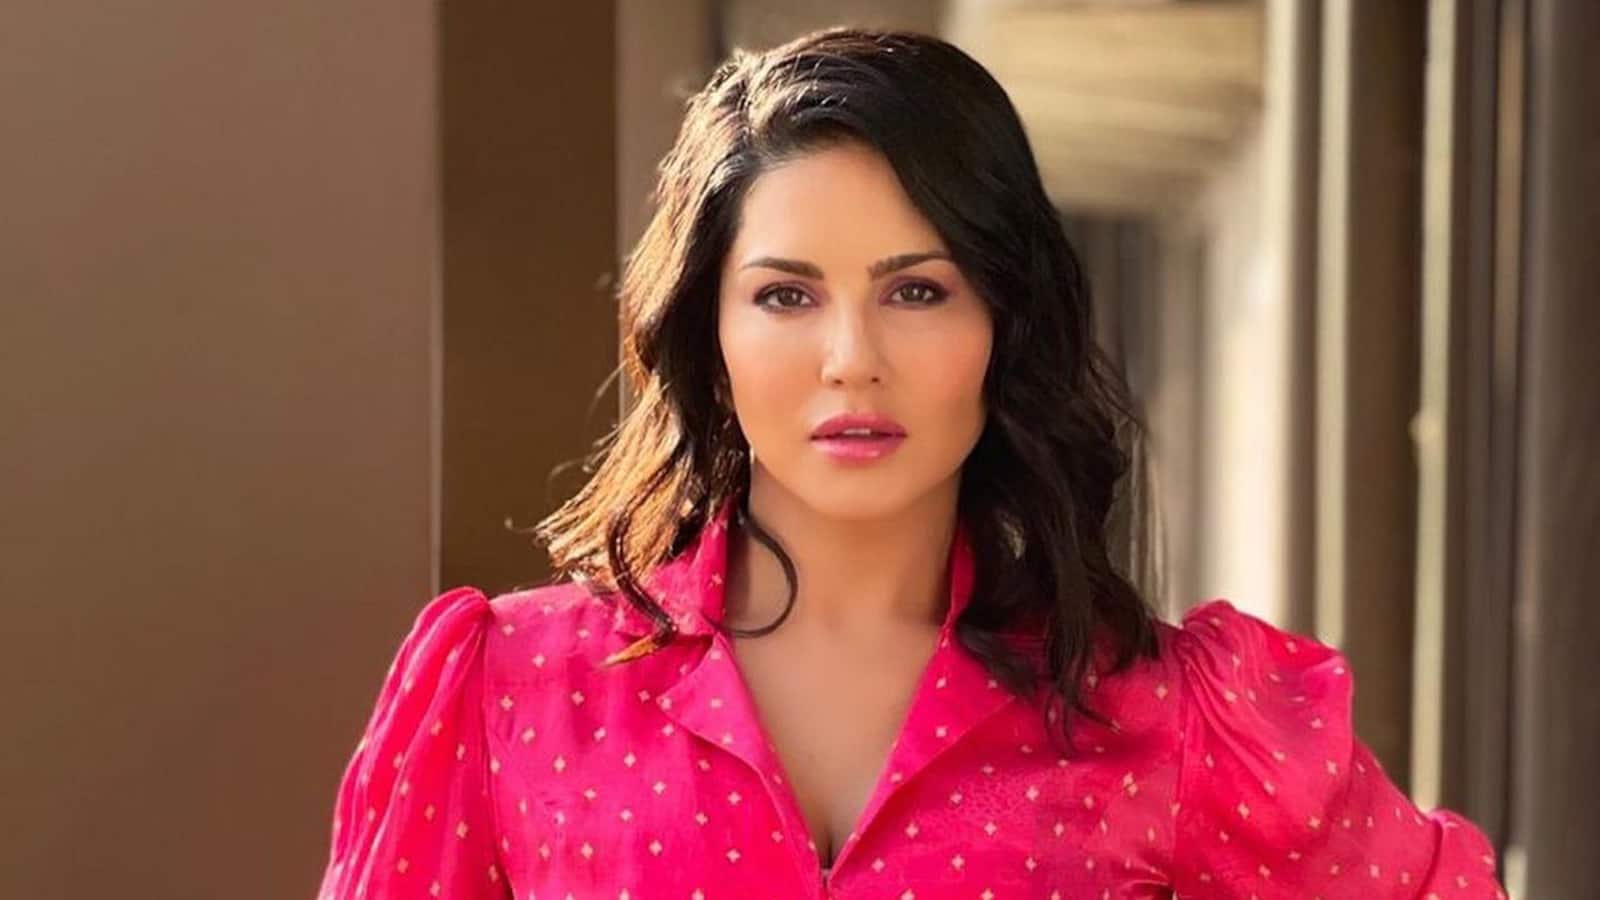 Sunny Leone RECALLS feeling hurt on multi-levels during her controversial 2016 interview: 'Not one person tried to stop it'